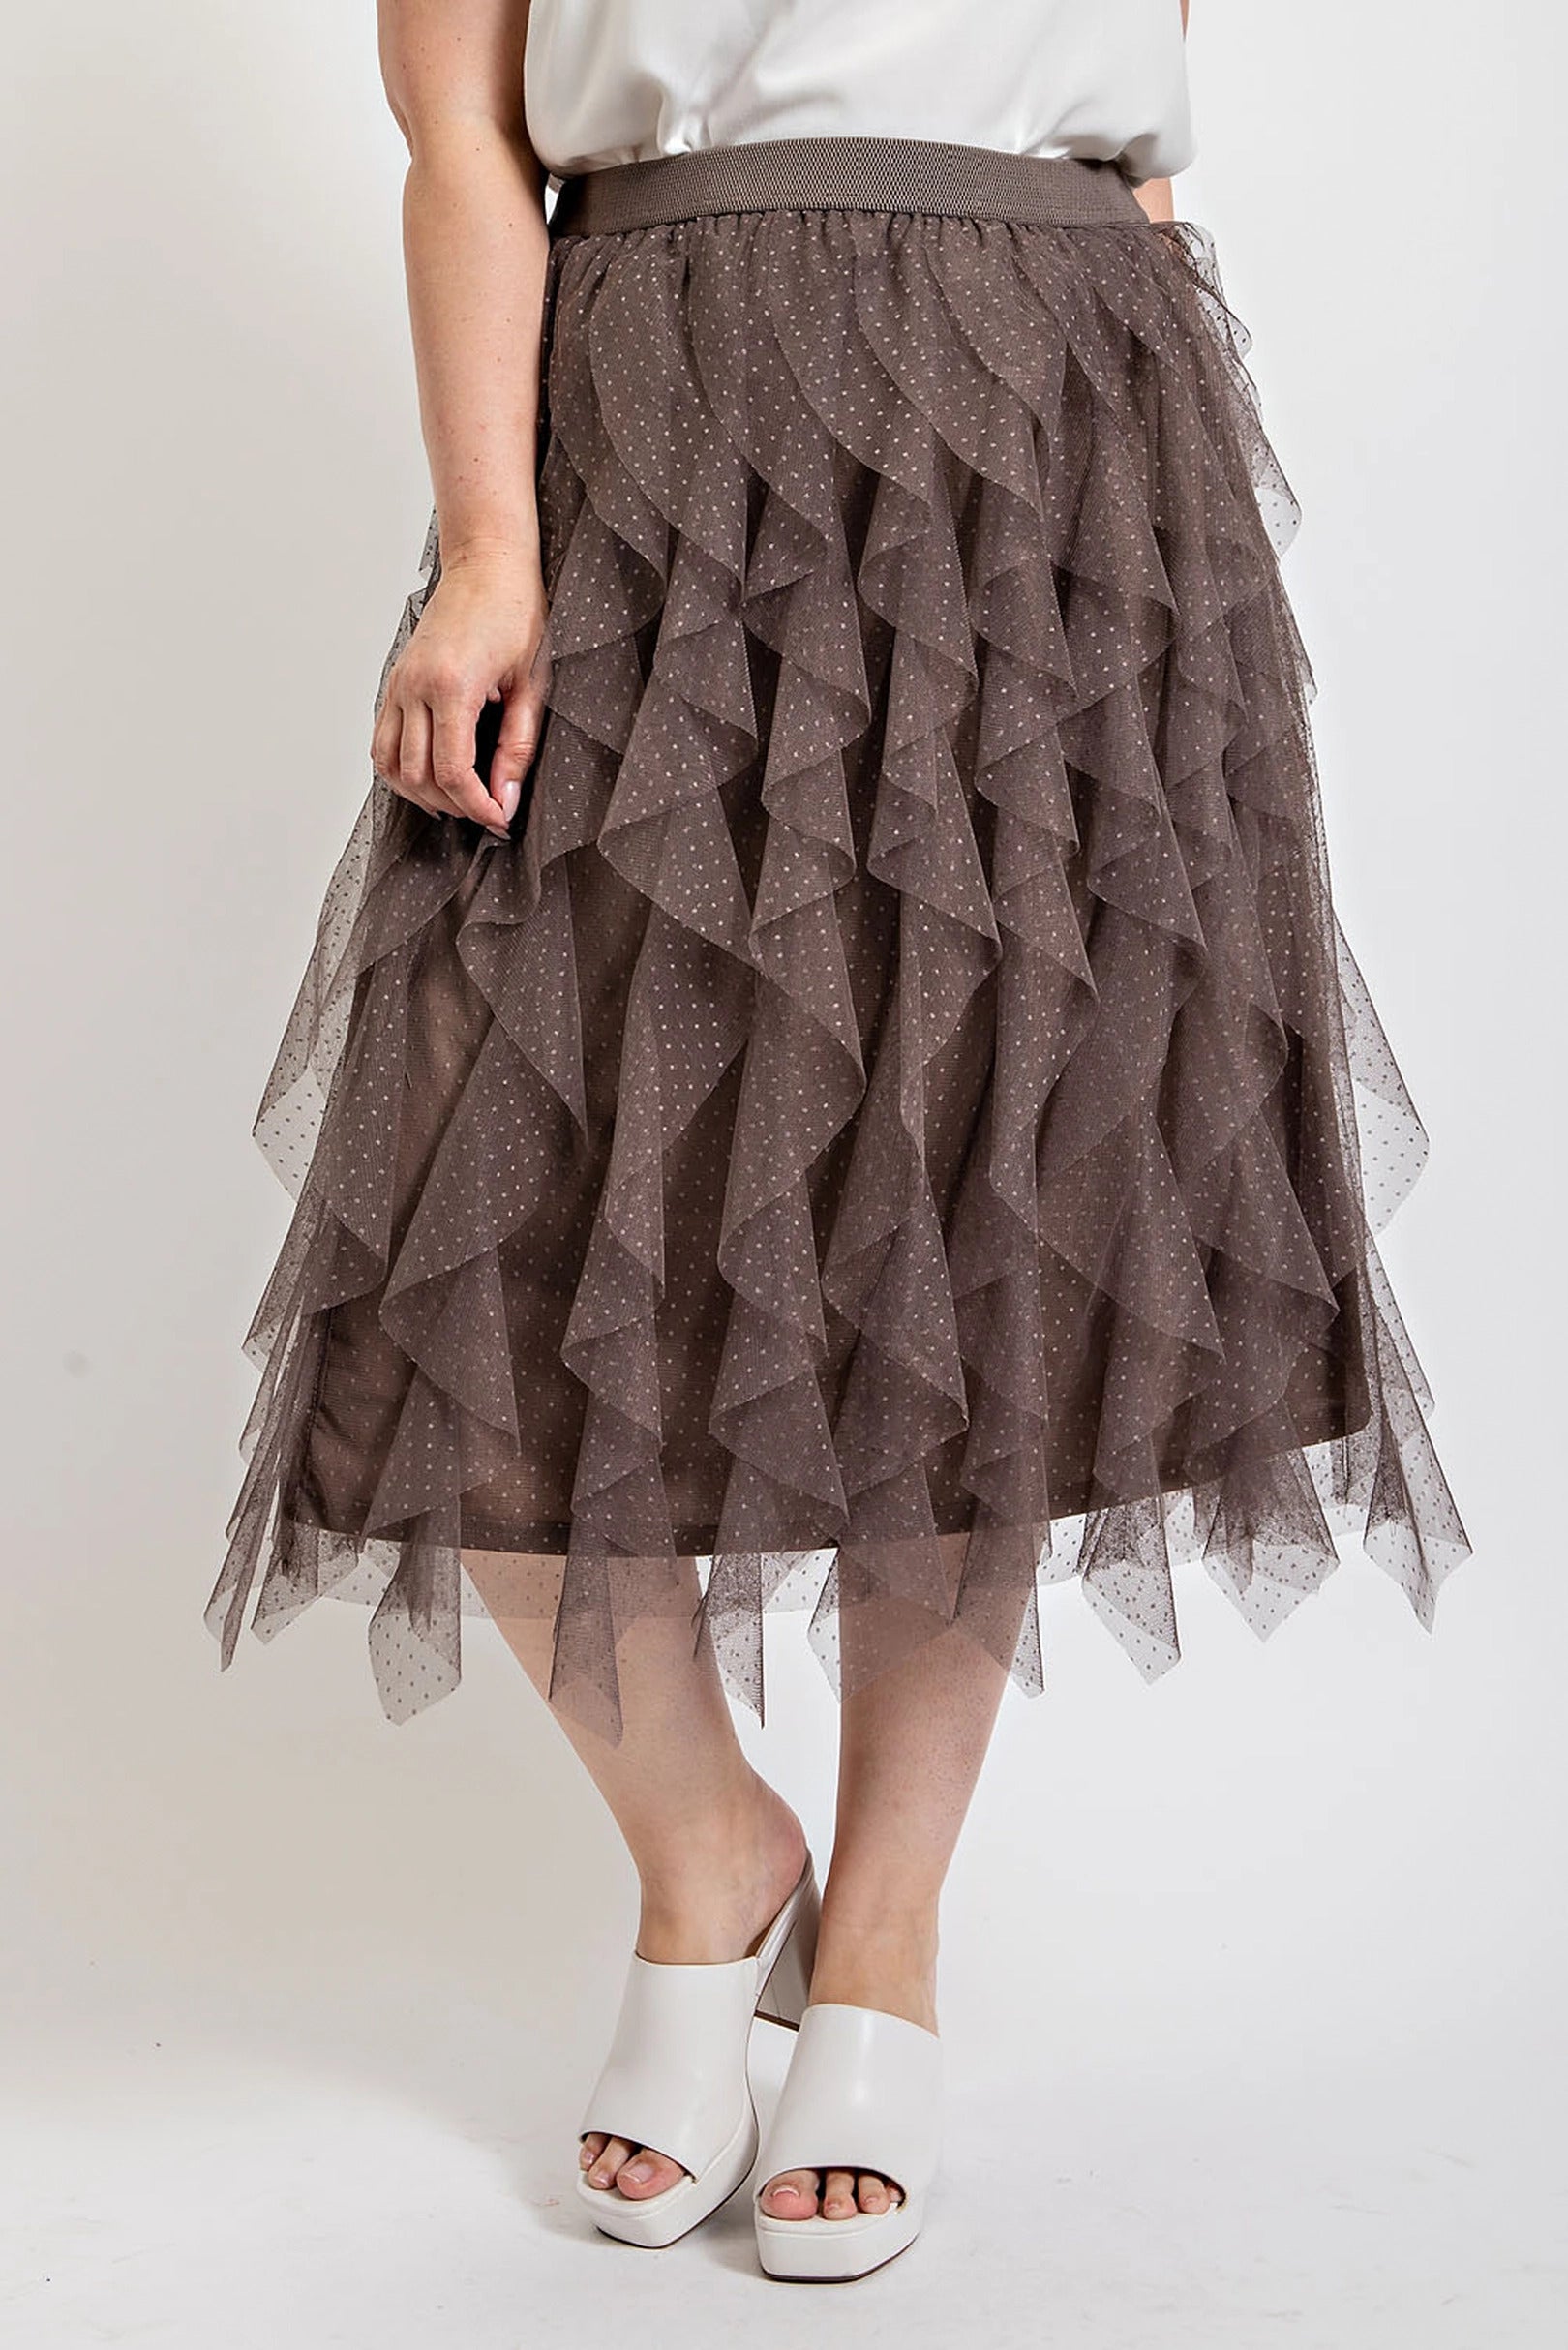 Voluptuous (+) Ruffled Tulle Plus Size Skirt With Elastic Waist Band